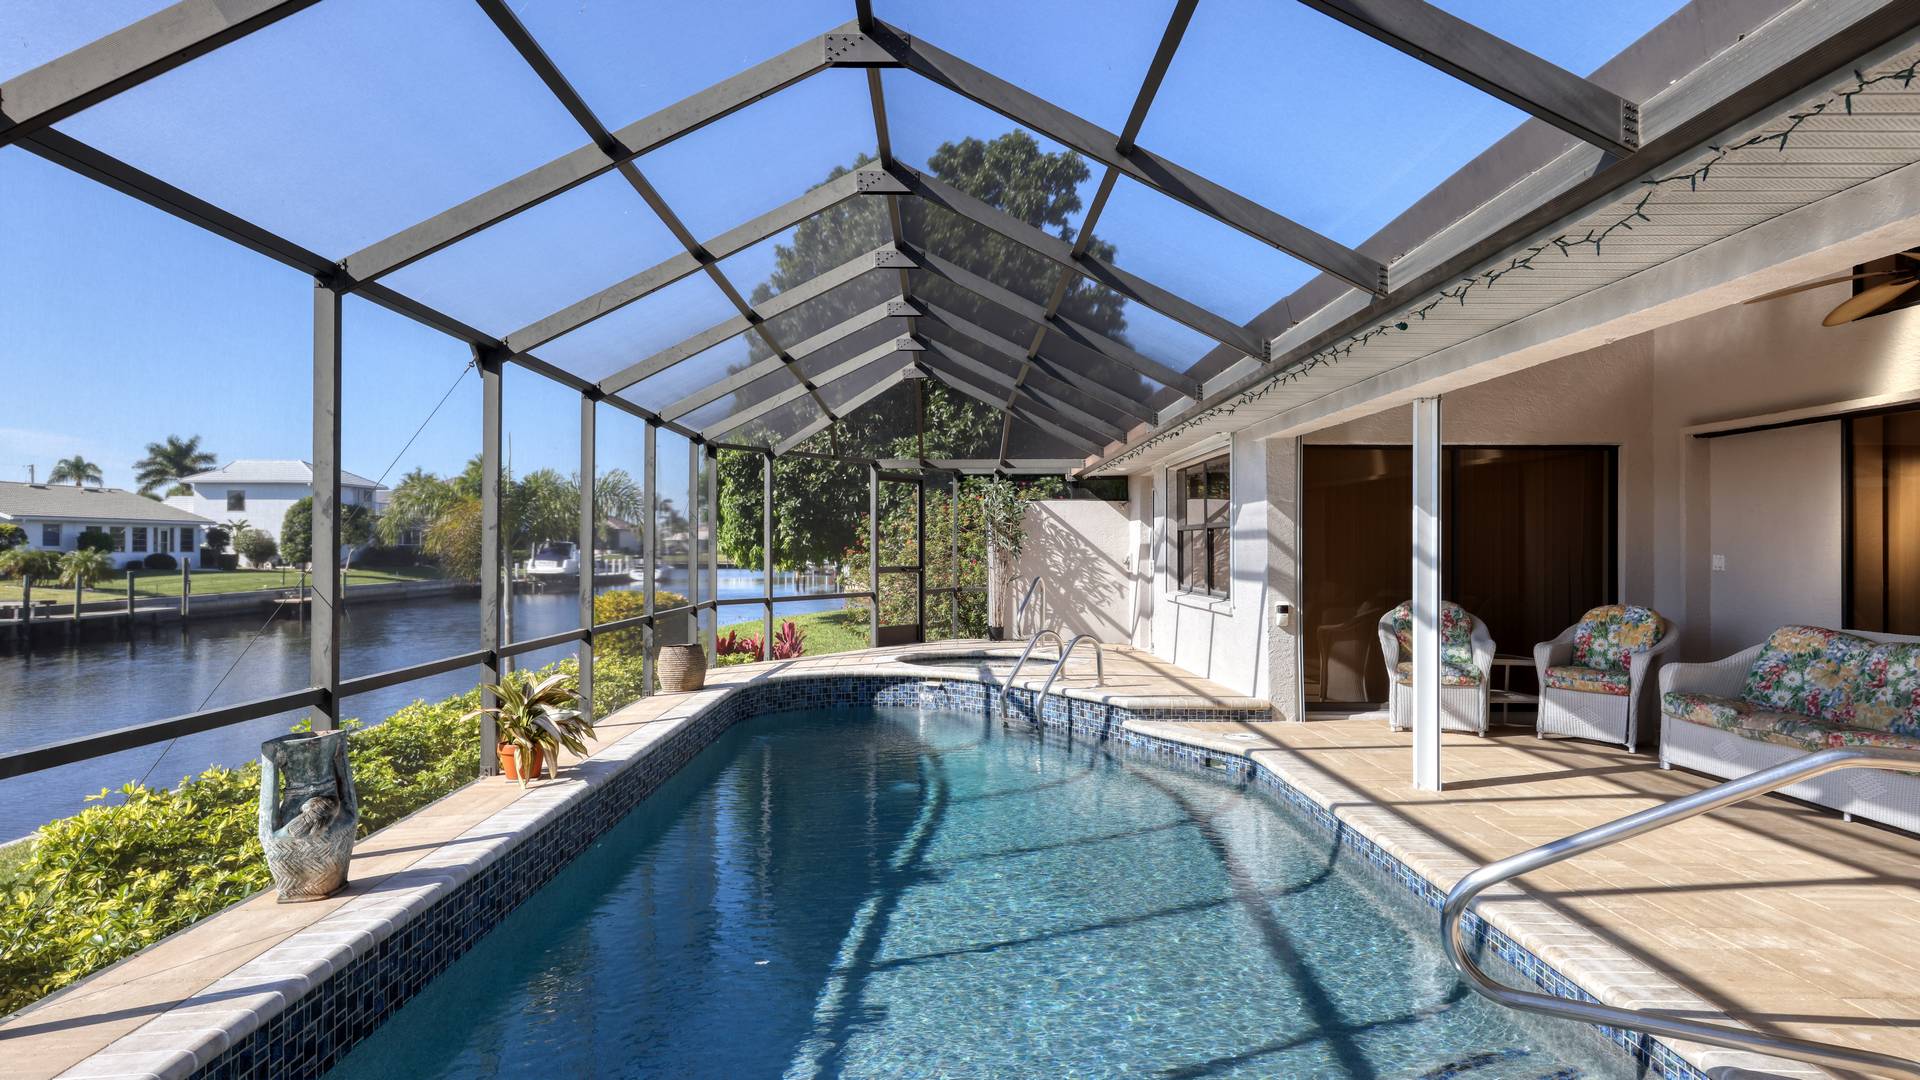 Gorgeous private pool and spa with canal sailboat access to Charlotte Harbor and the Gulf of Mexico beyond